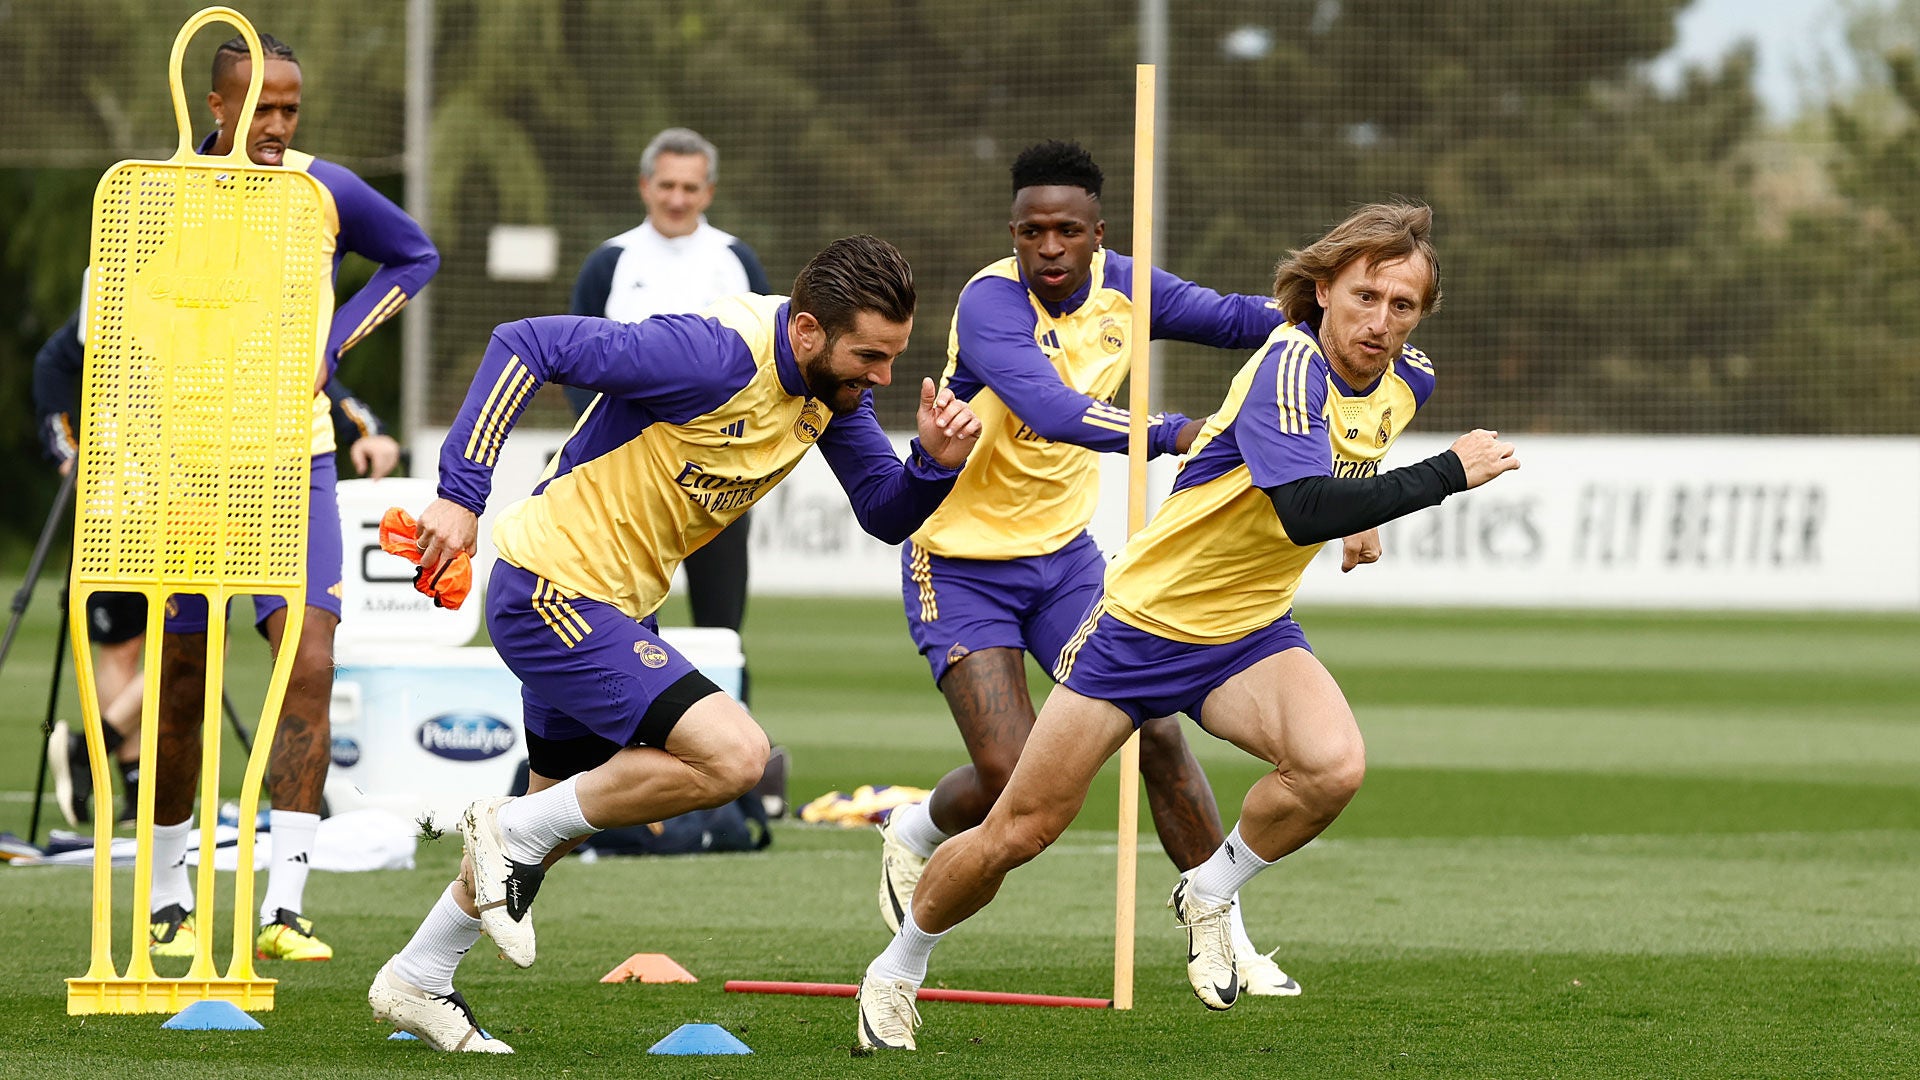 Final training session before Real Sociedad match